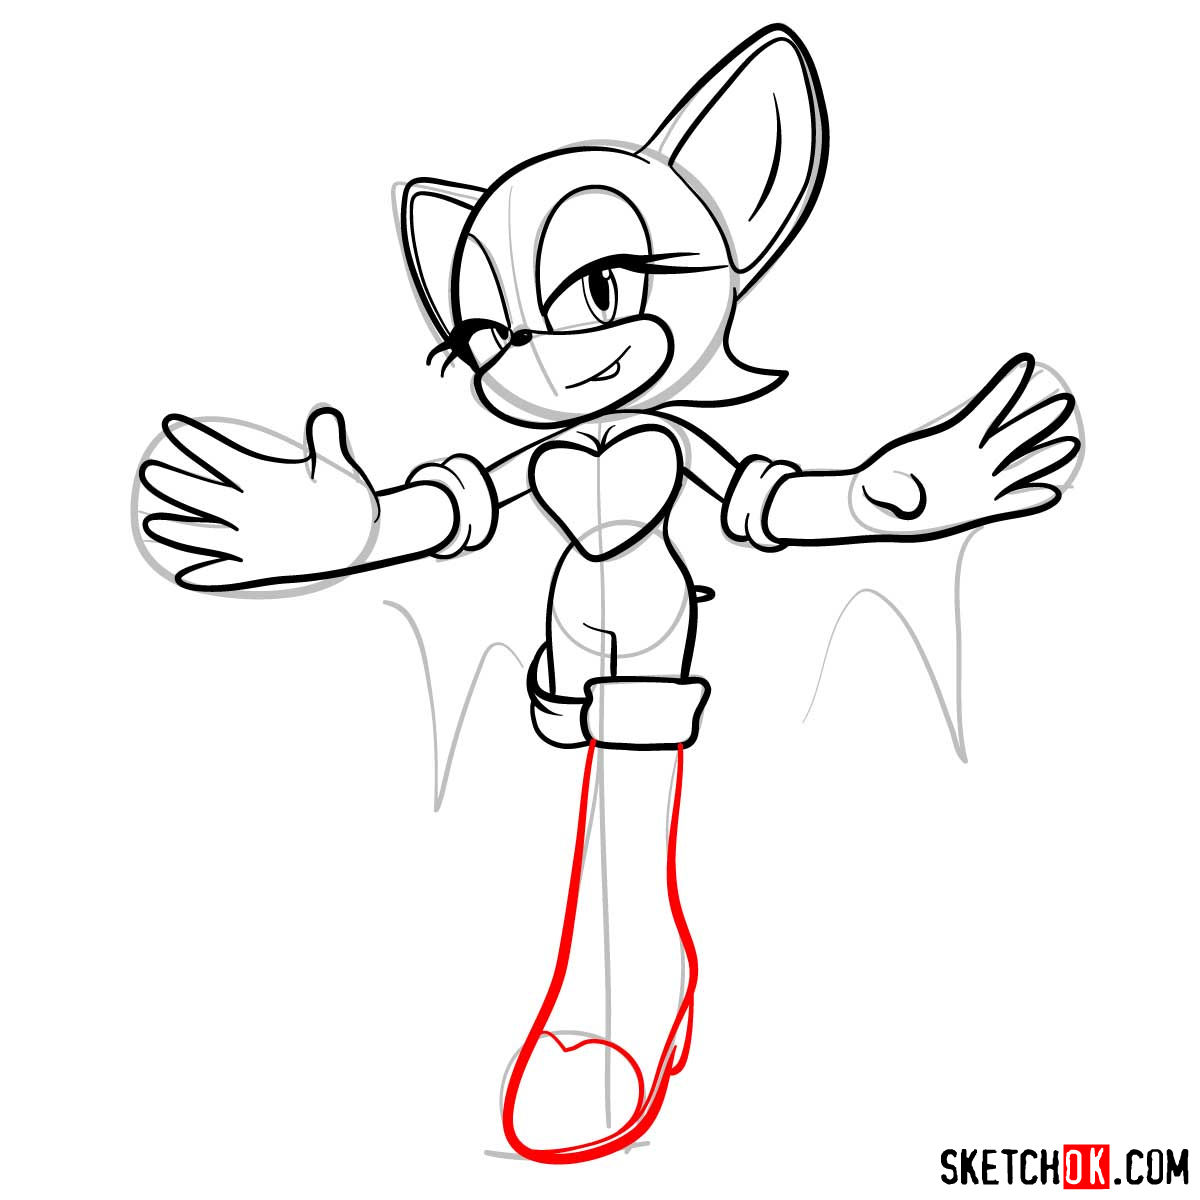 How to draw Rouge the Bat from Sonic the Hedgehog - step 10